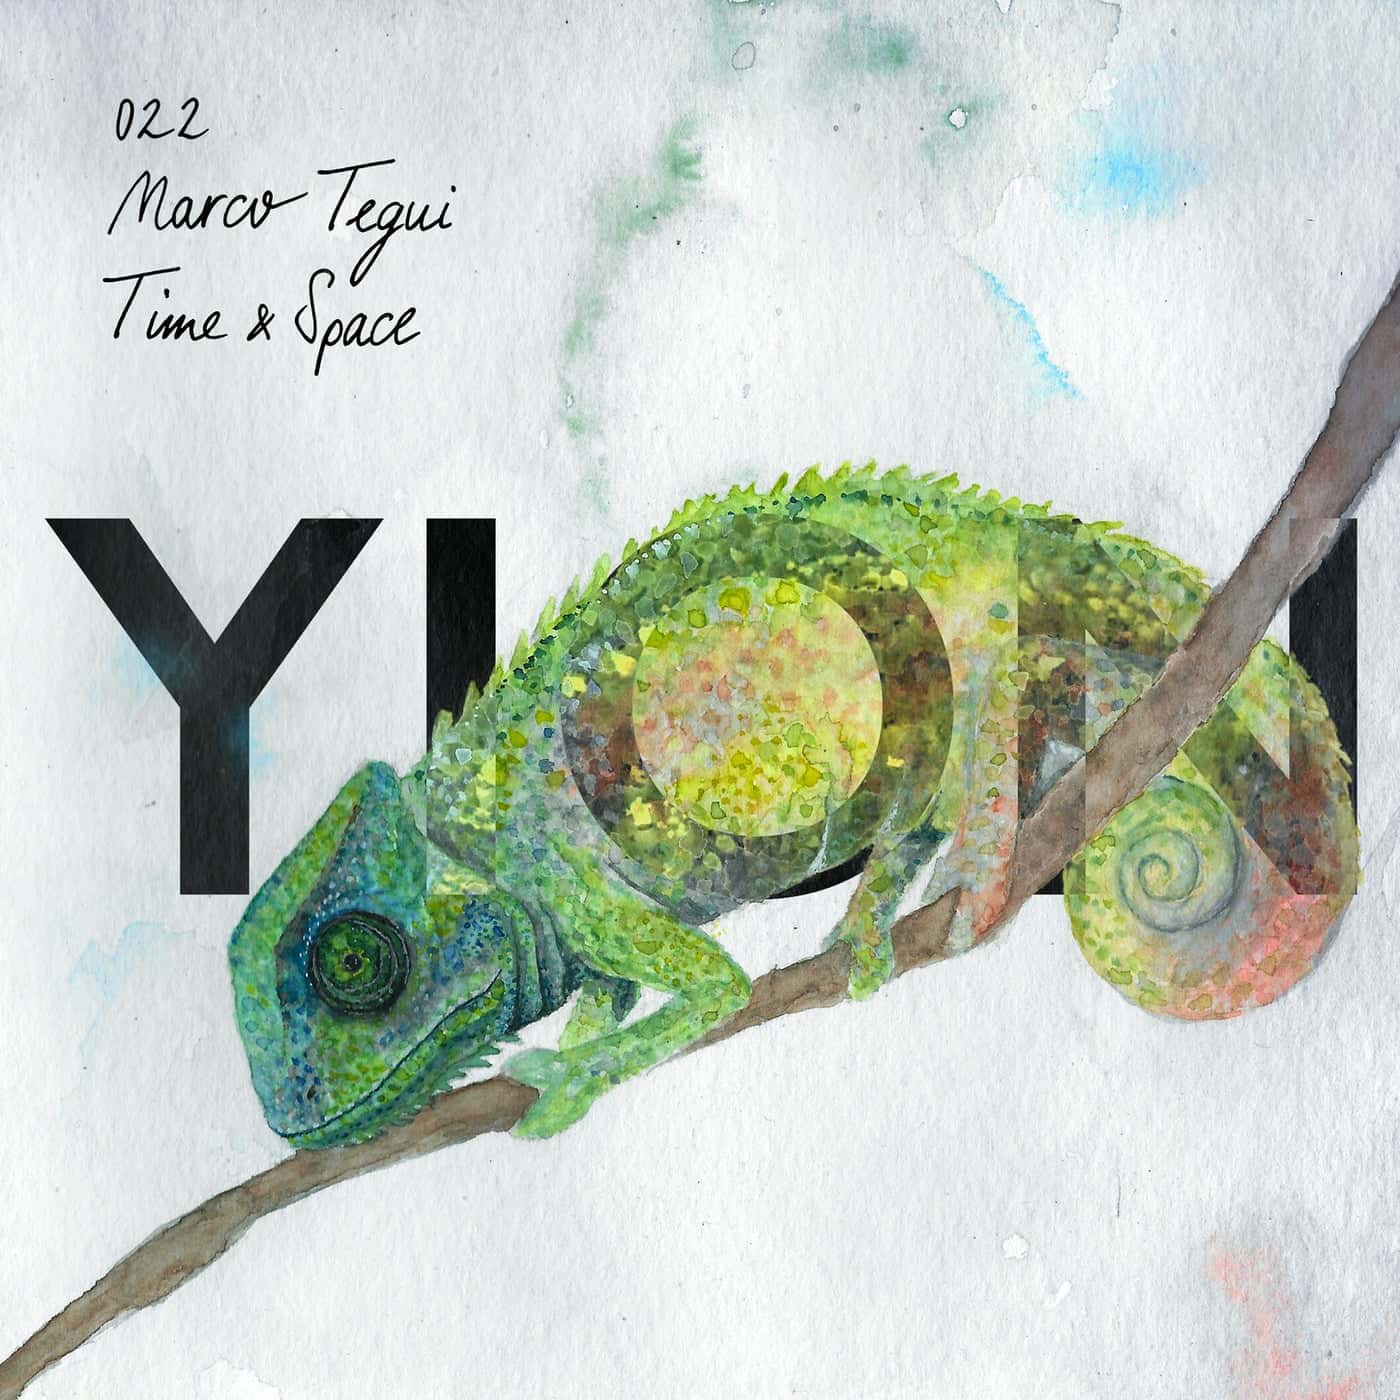 image cover: Marco Tegui, Yusuf Lemone - Time & Space / YION022